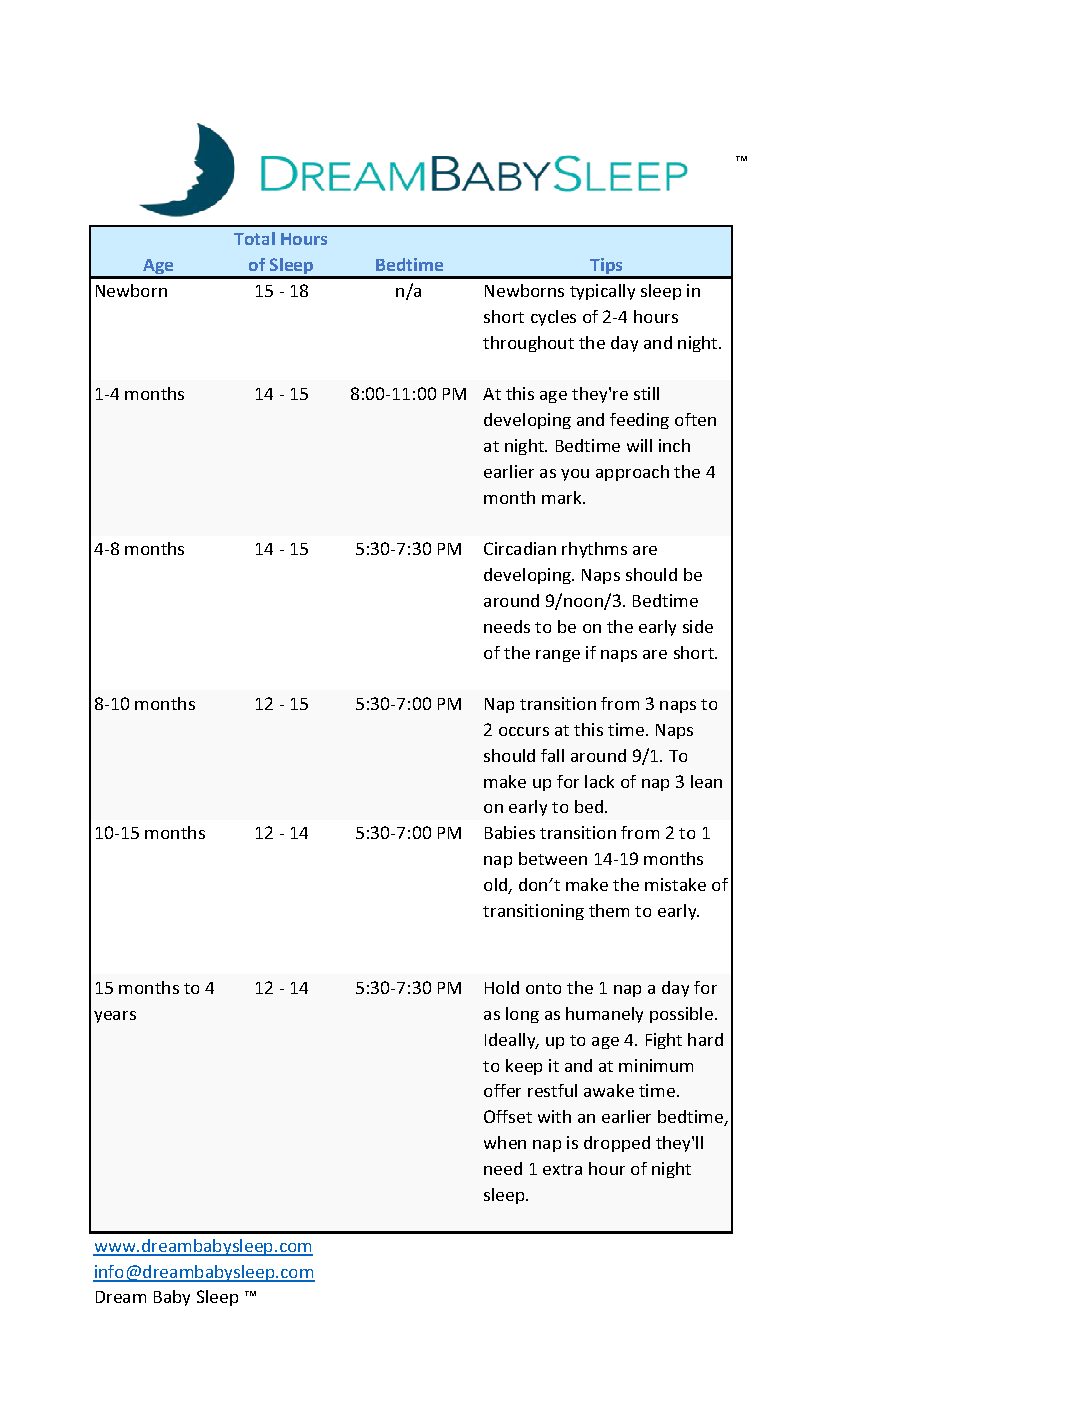 bedtime by age - timing is everything - dream baby sleep - baby